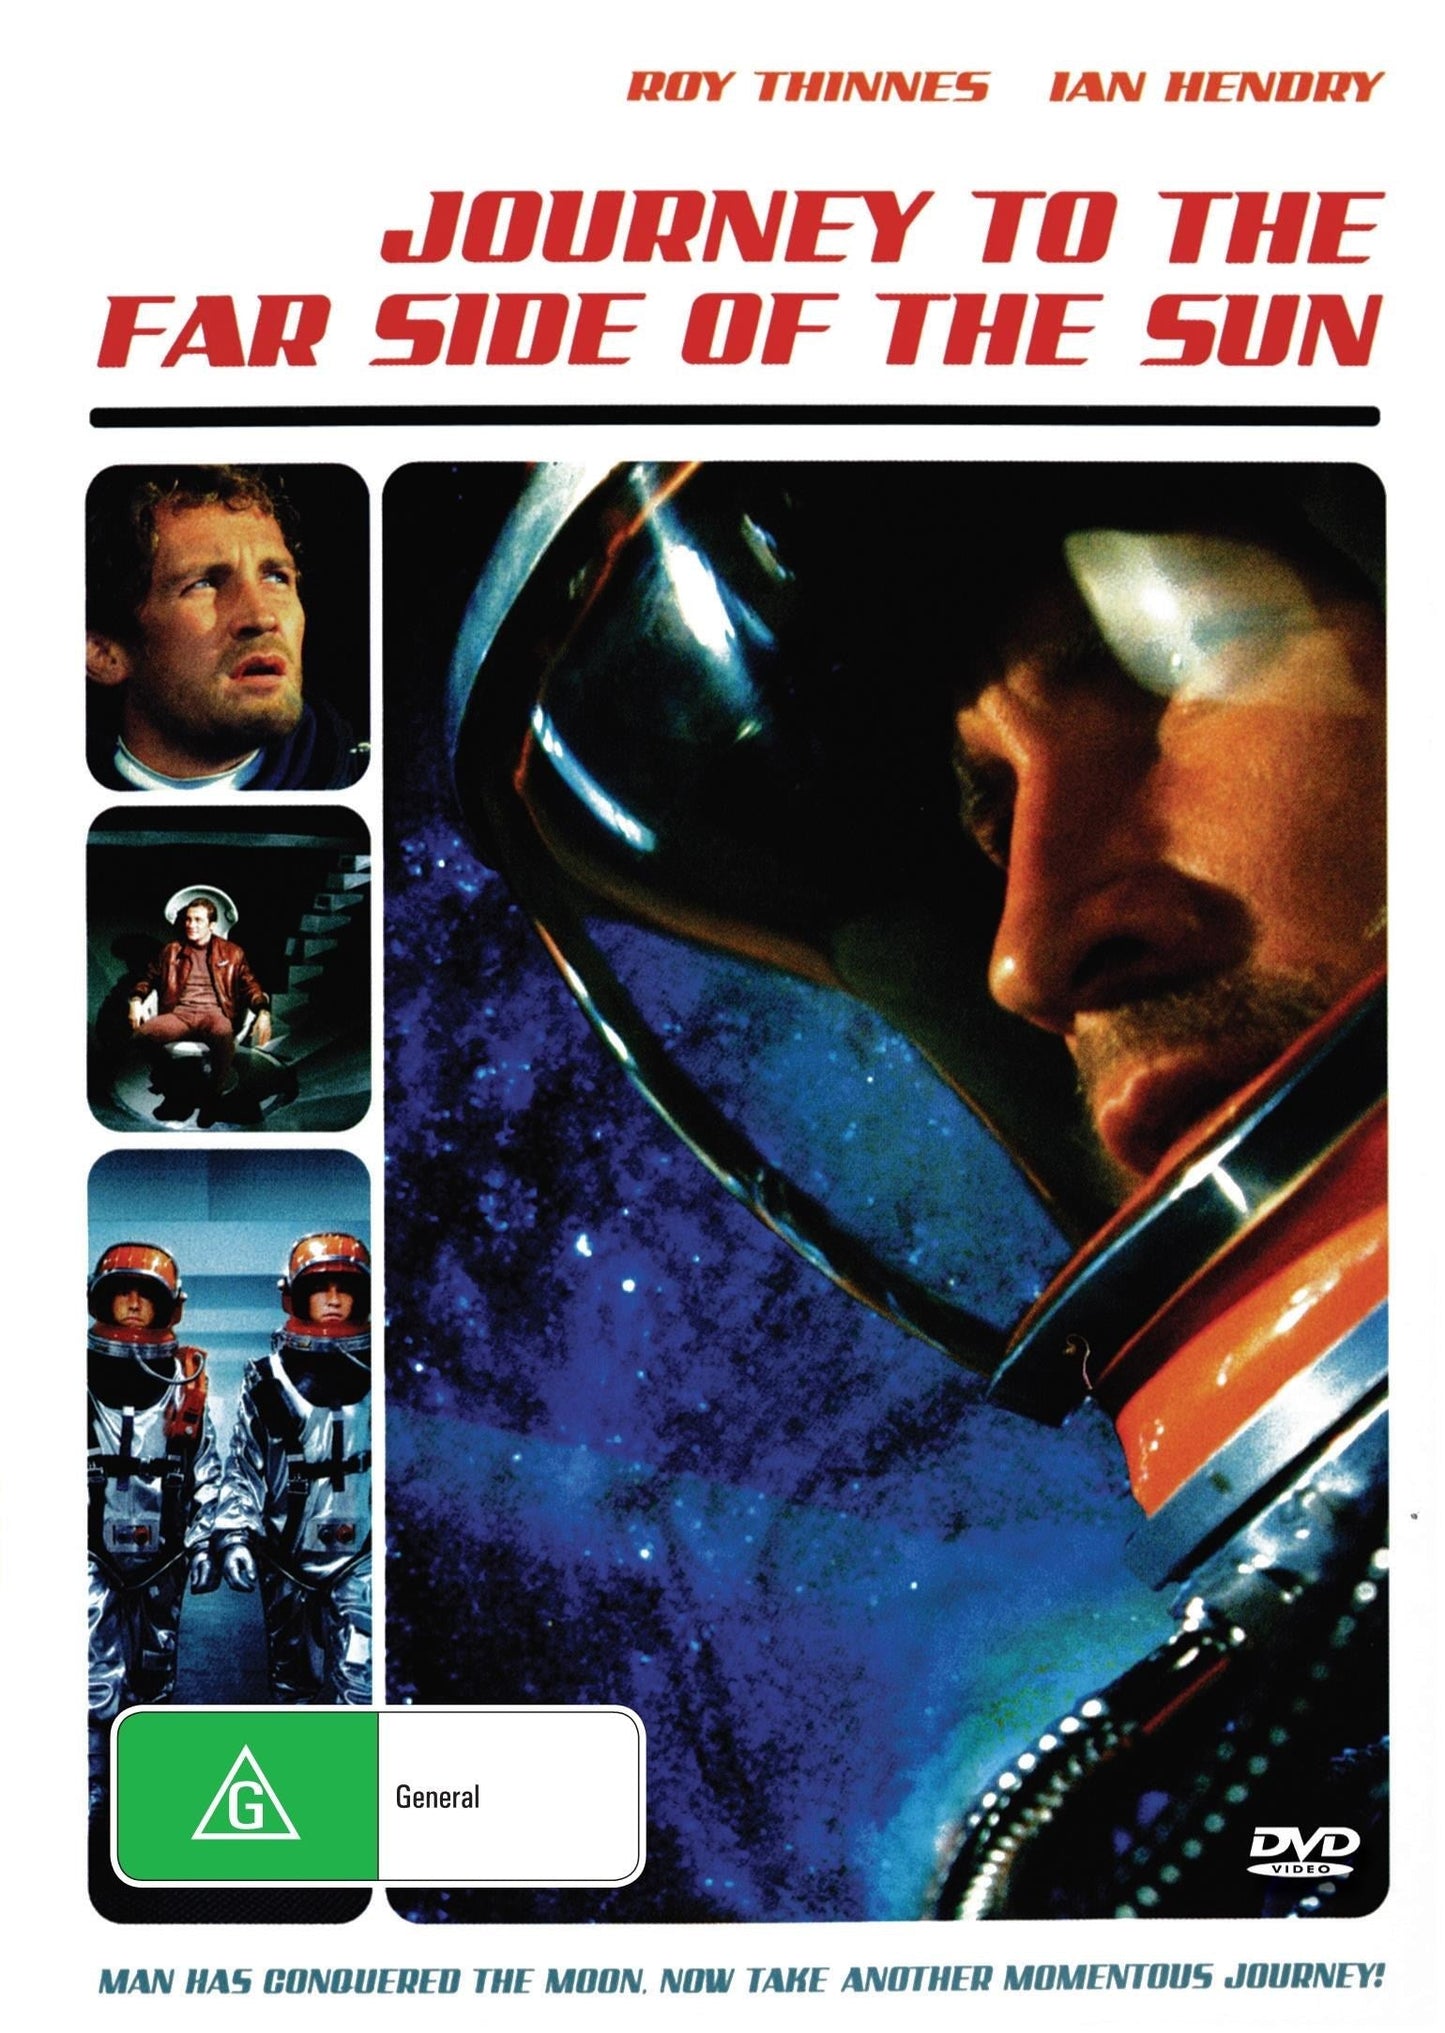 Journey To The Far Side Of The Sun rareandcollectibledvds